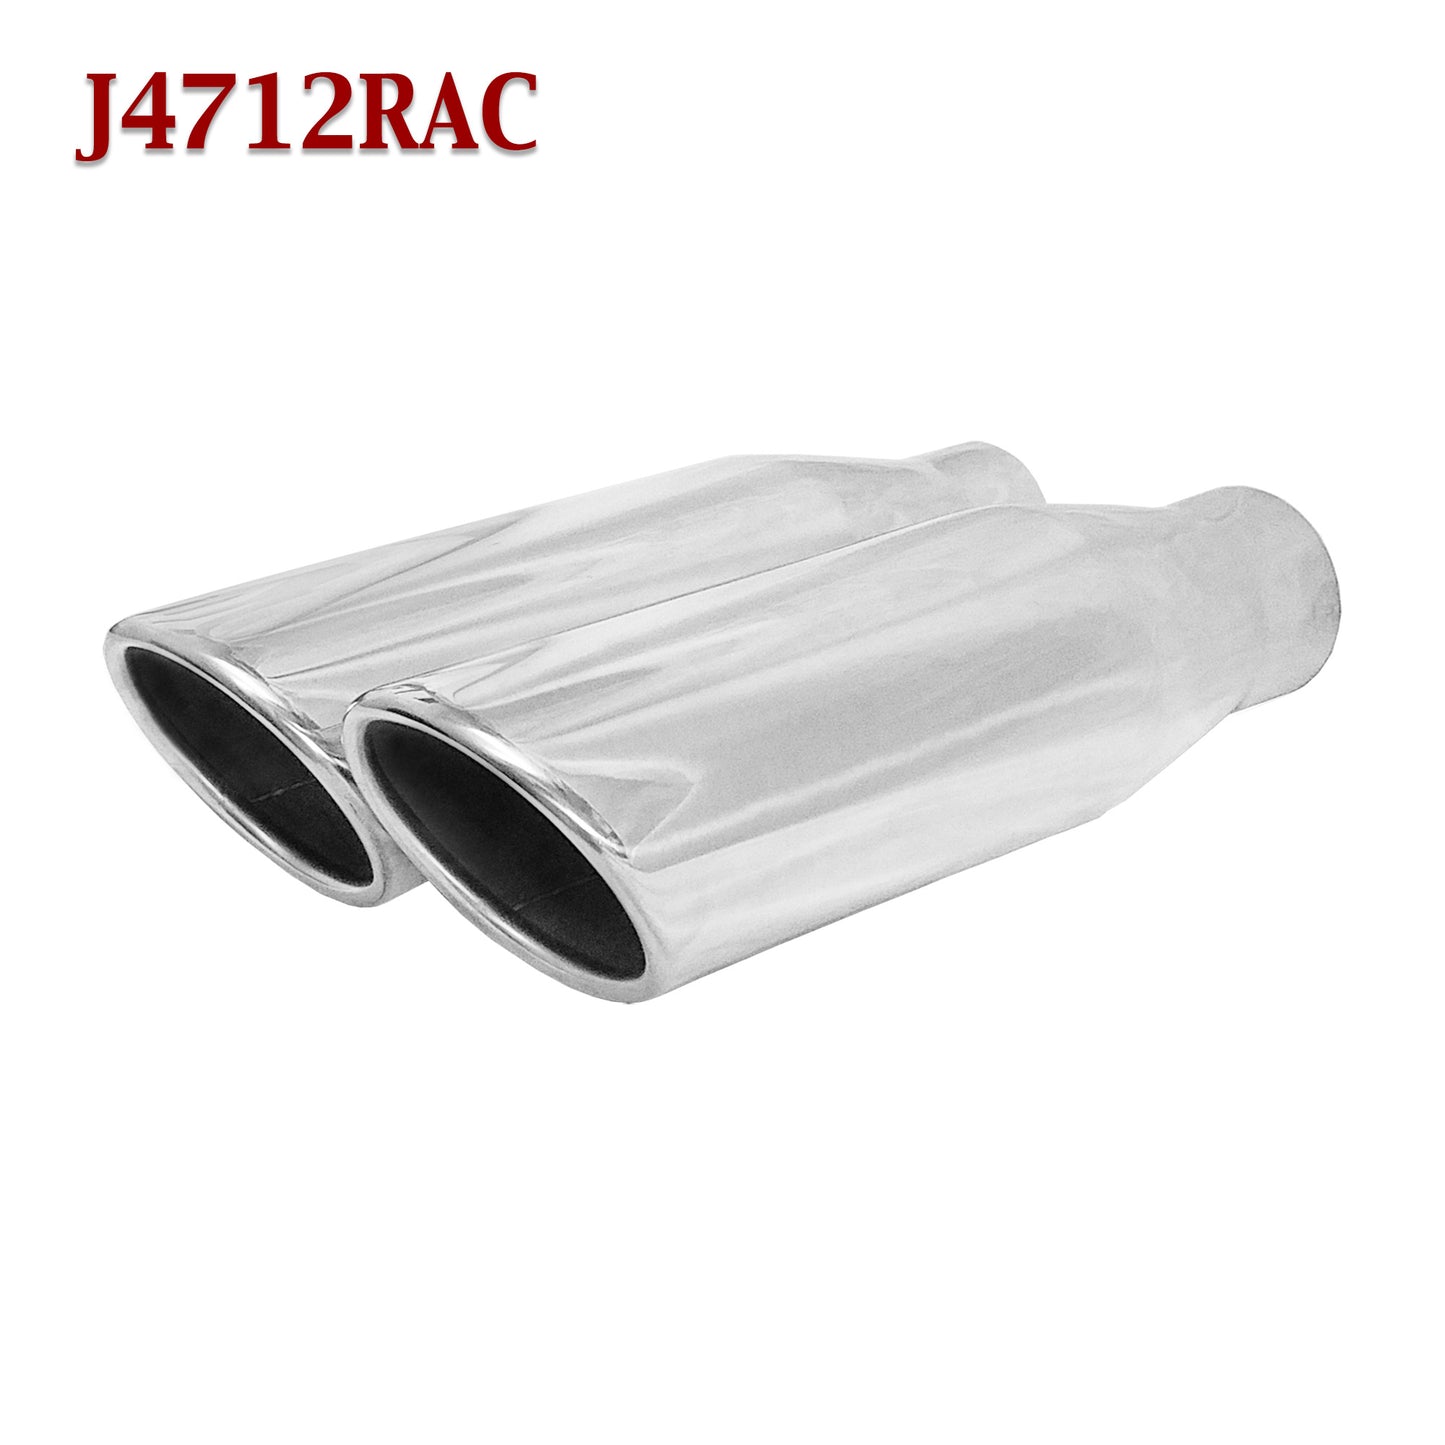 J4712RAC 2.25" Stainless Truck Exhaust Tip 2 1/4" Inlet - 3 1/2" 3.5" Outlet - 12" Long